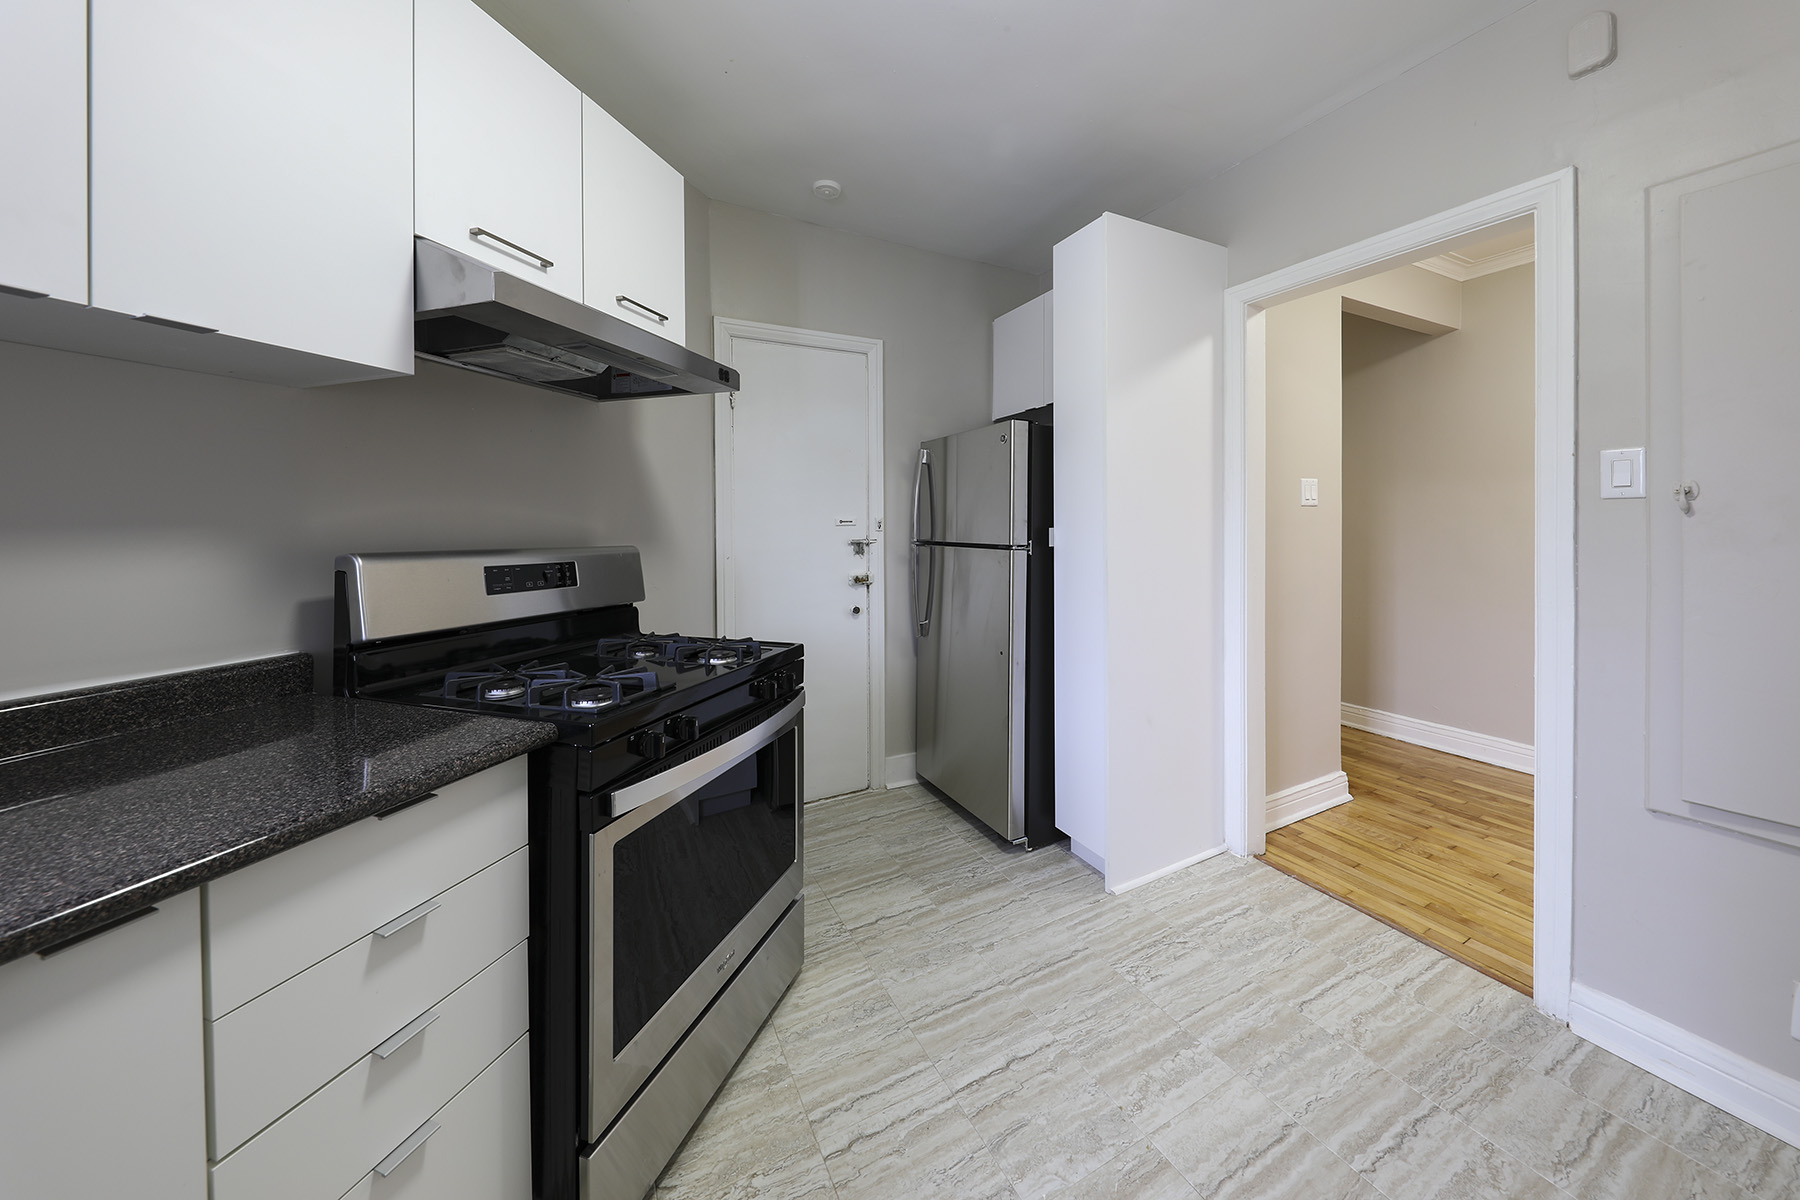 2 bedroom Apartments for rent in Notre-Dame-de-Grace at 6325 Somerled - Photo 12 - RentQuebecApartments – L401540